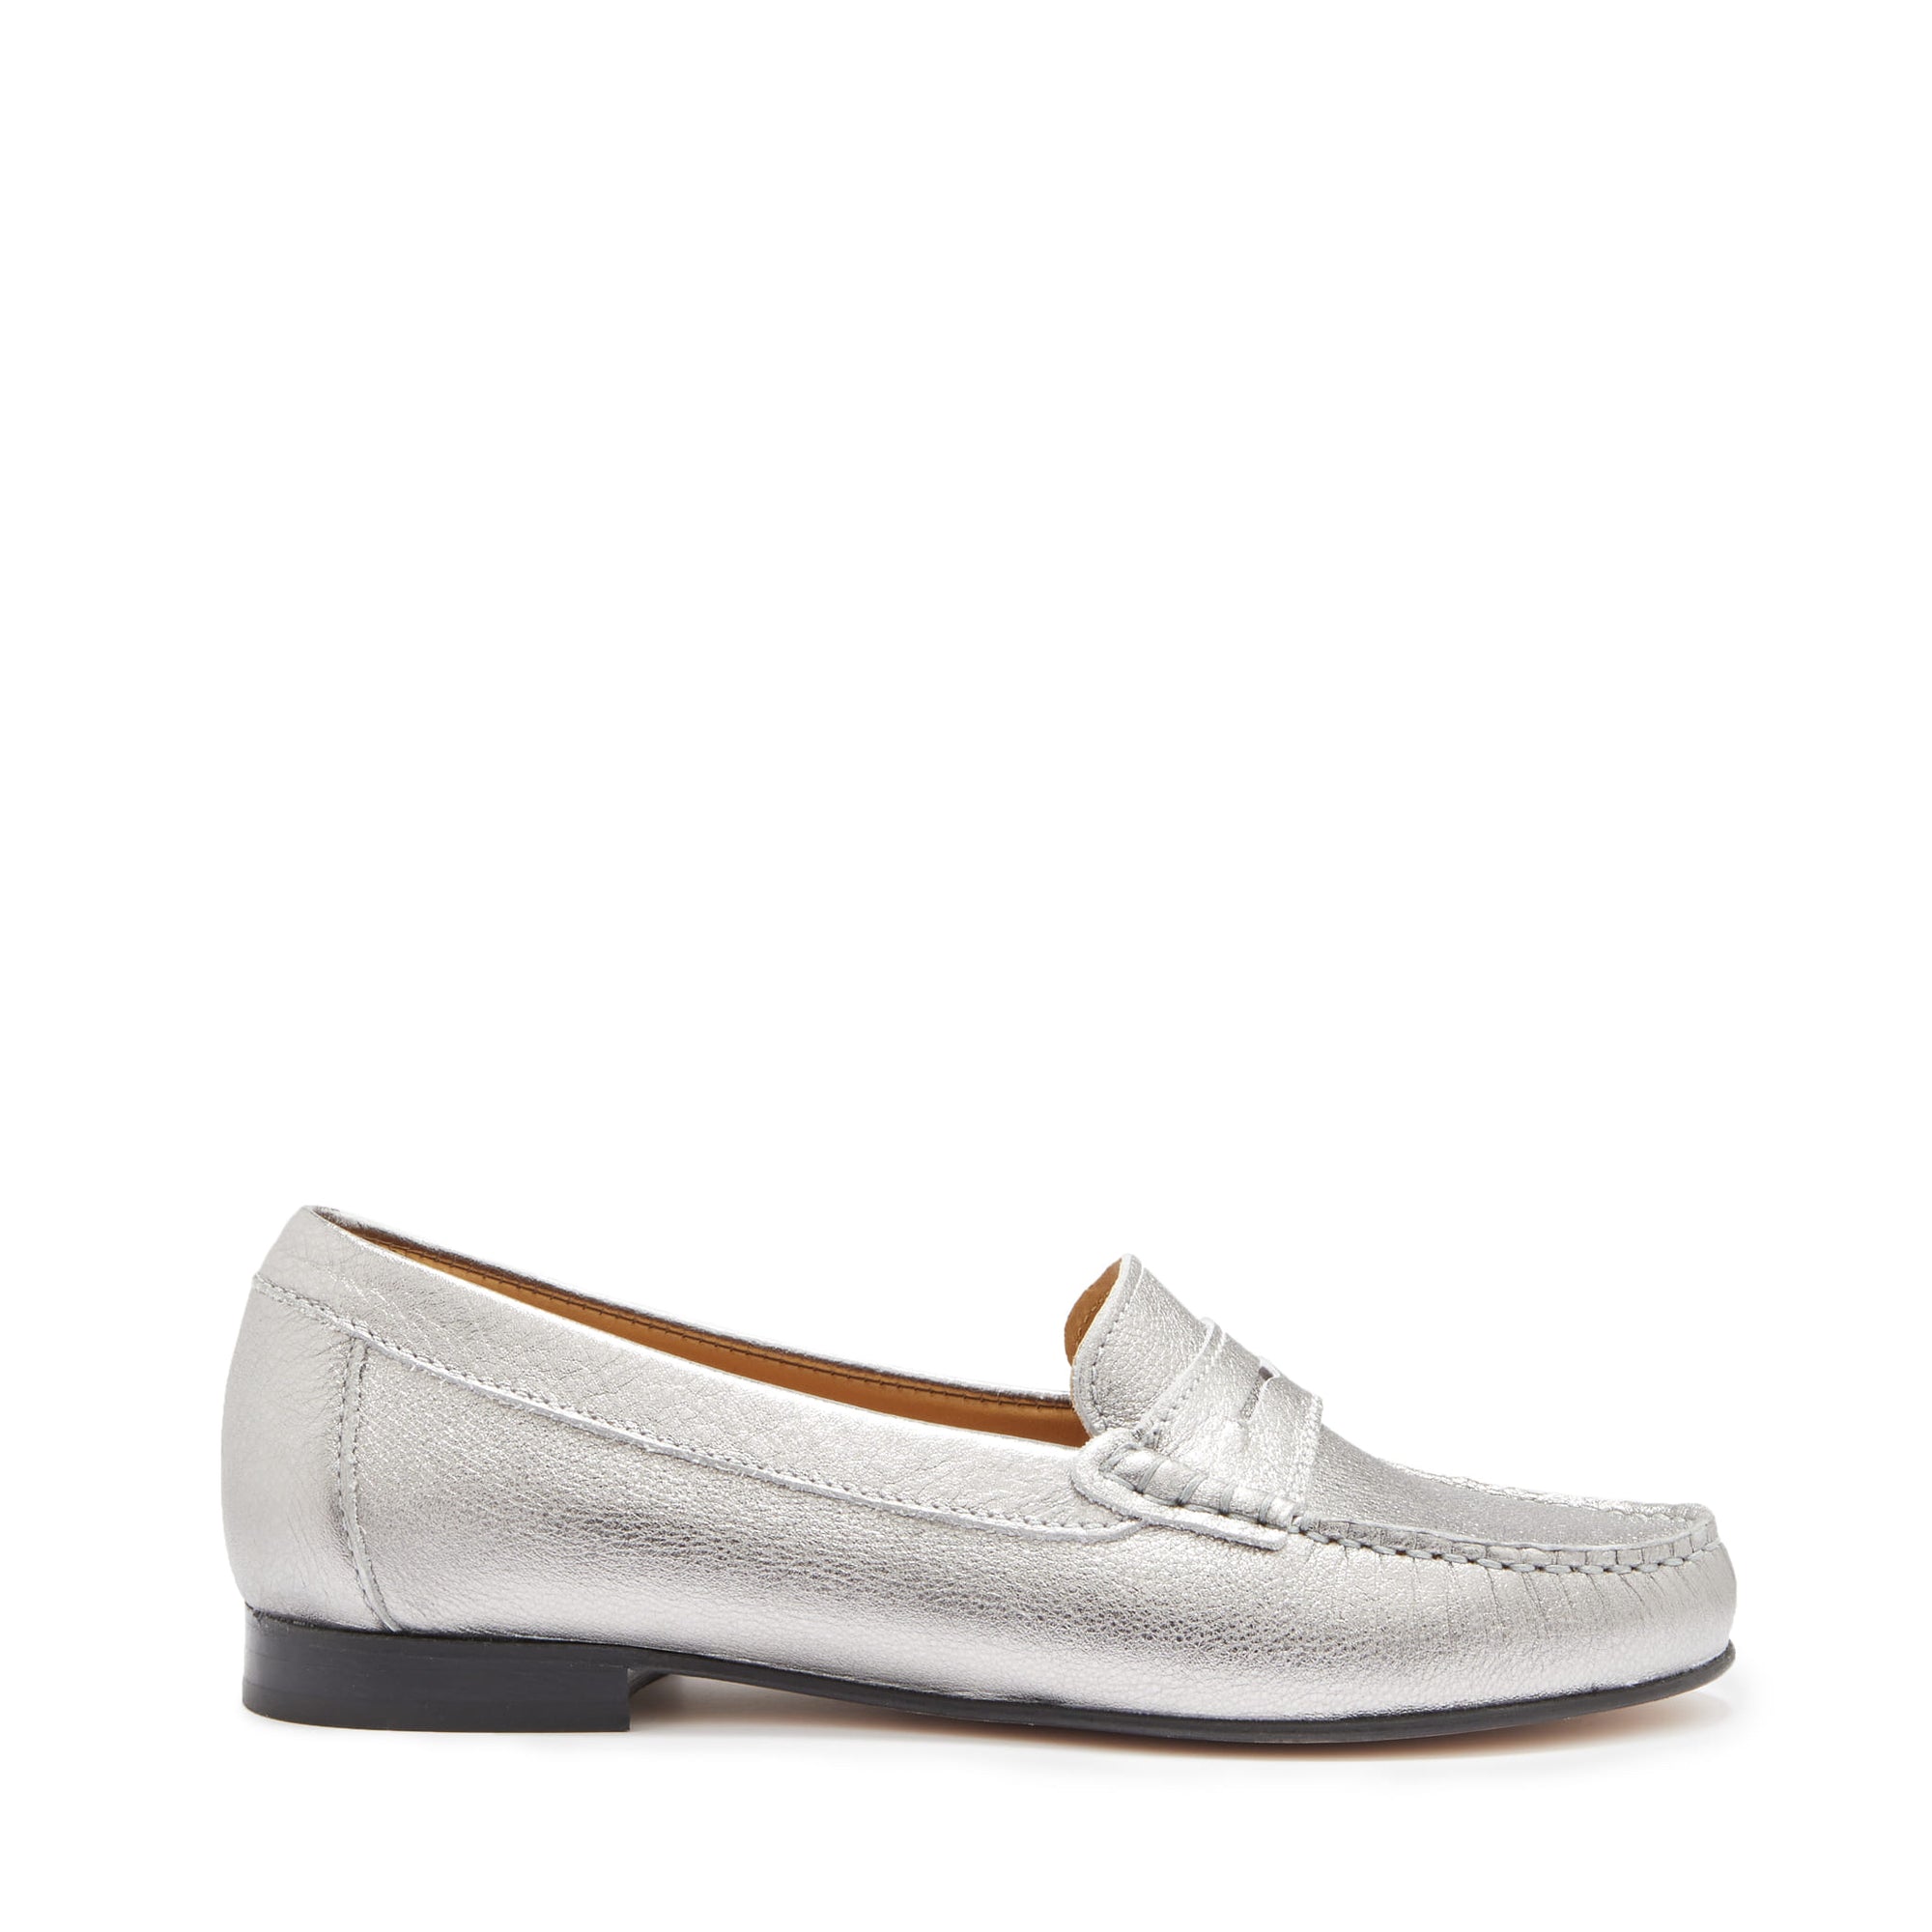 Women's Penny Loafers Leather Sole, titanium metallic leather